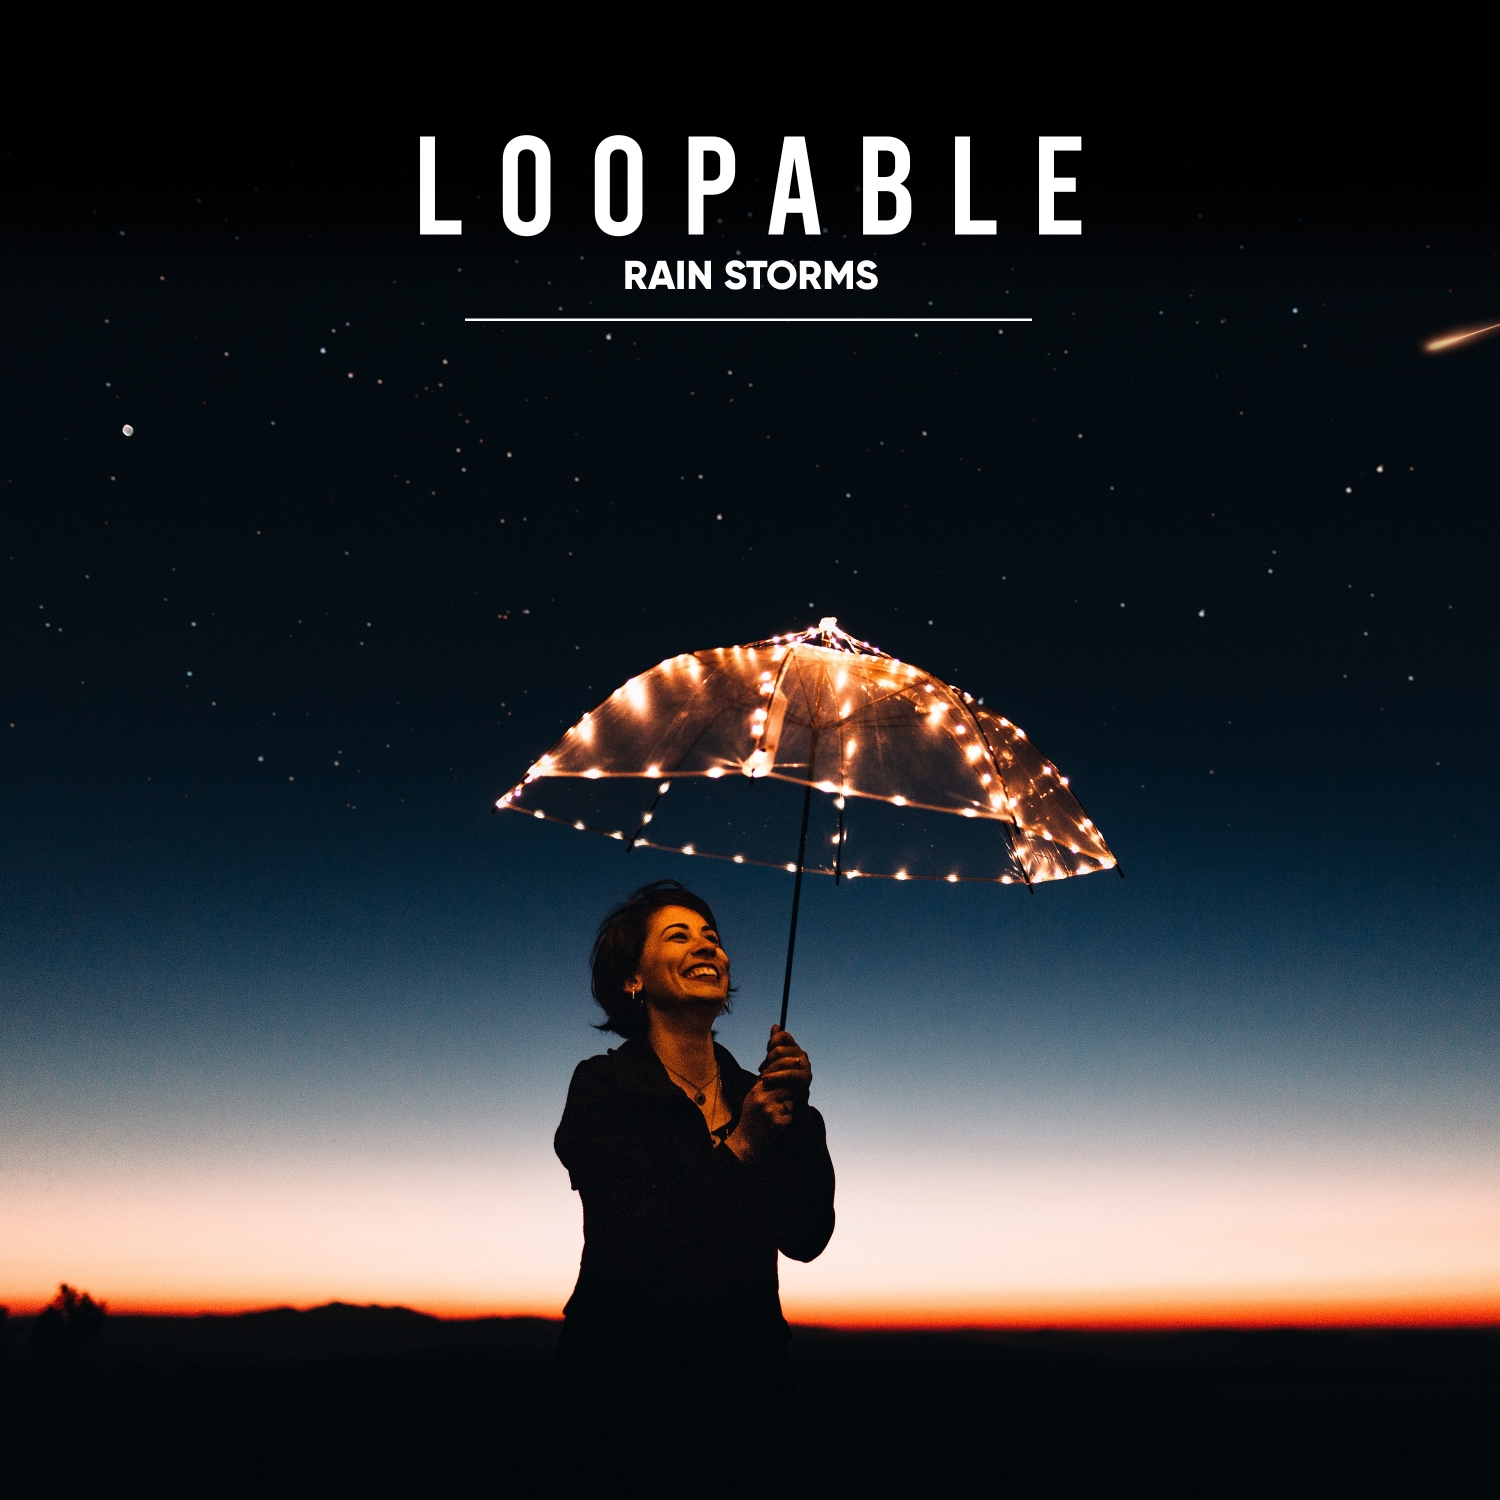 12 Loopable Rain Storms to Unwind & Relax